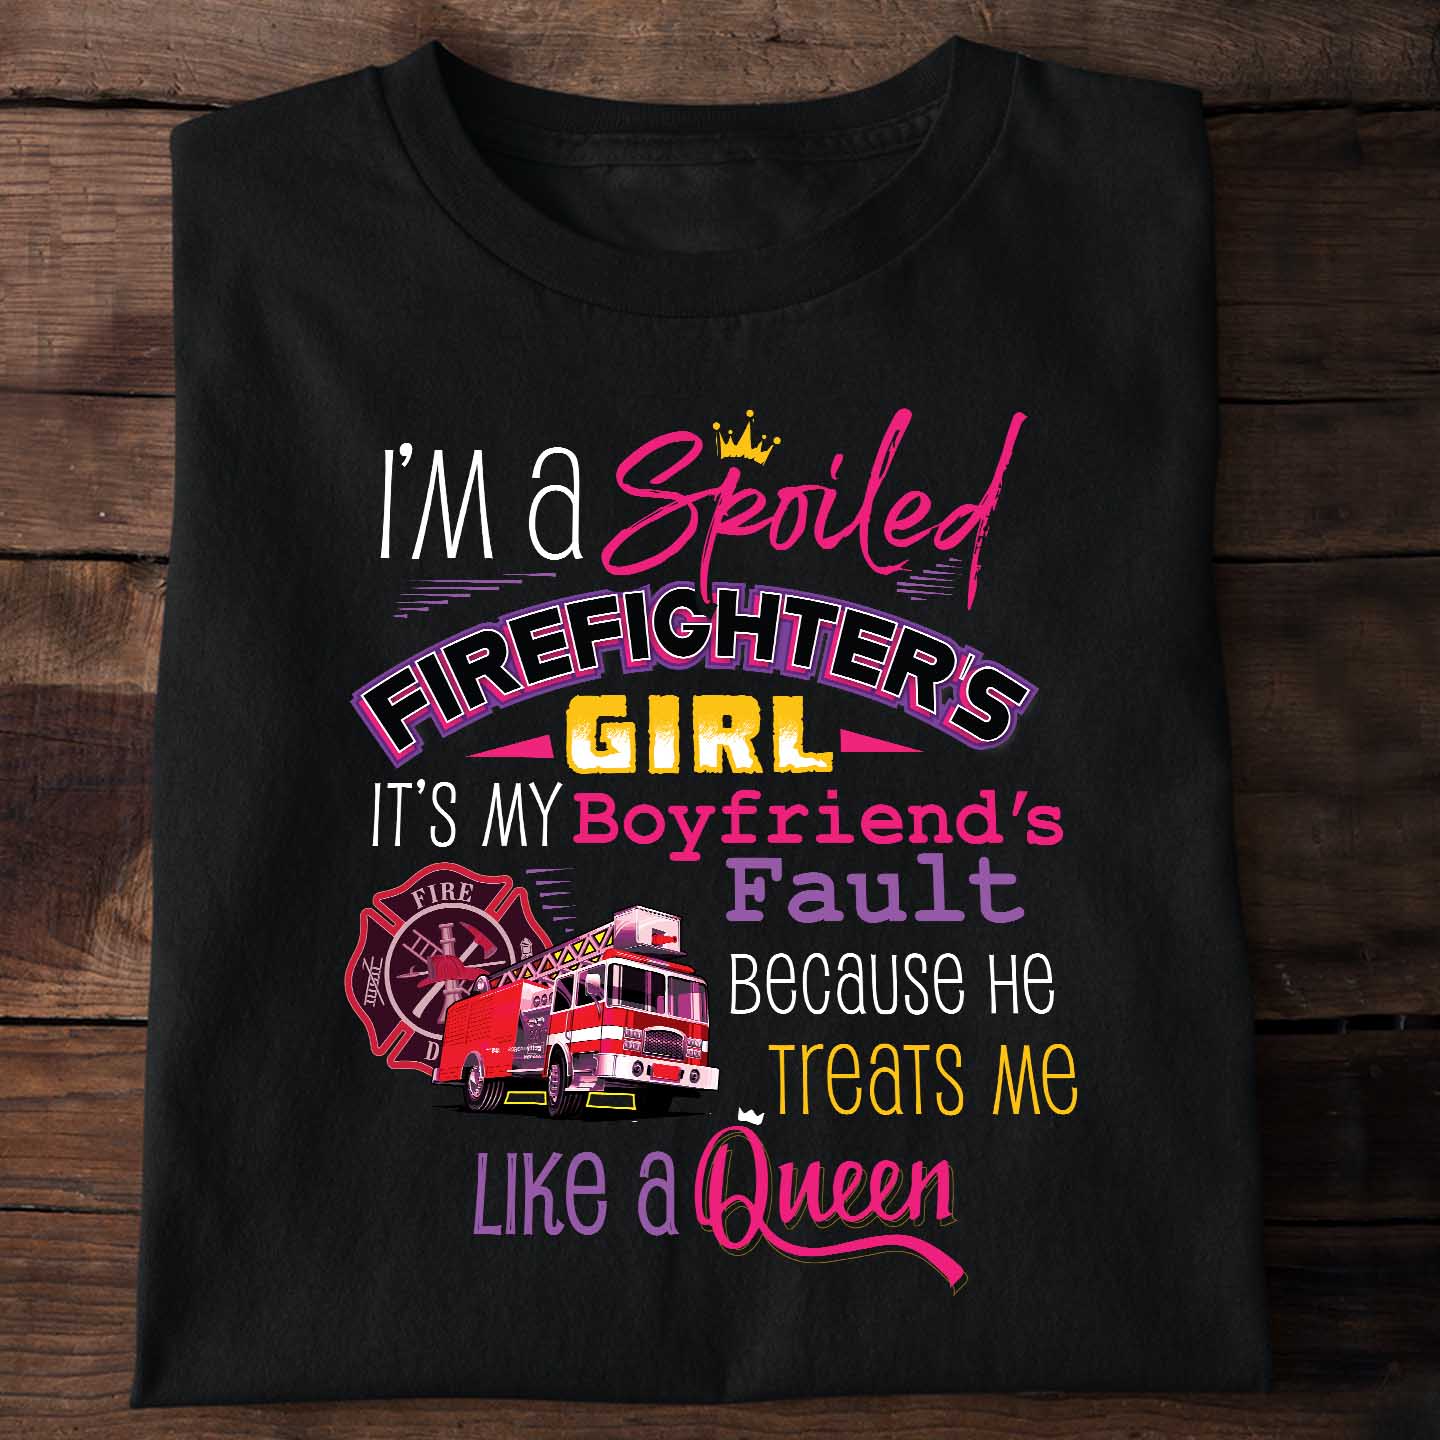 I'm a spoiled firefighter's girl It's my boyfriend fault because he treats me like a queen